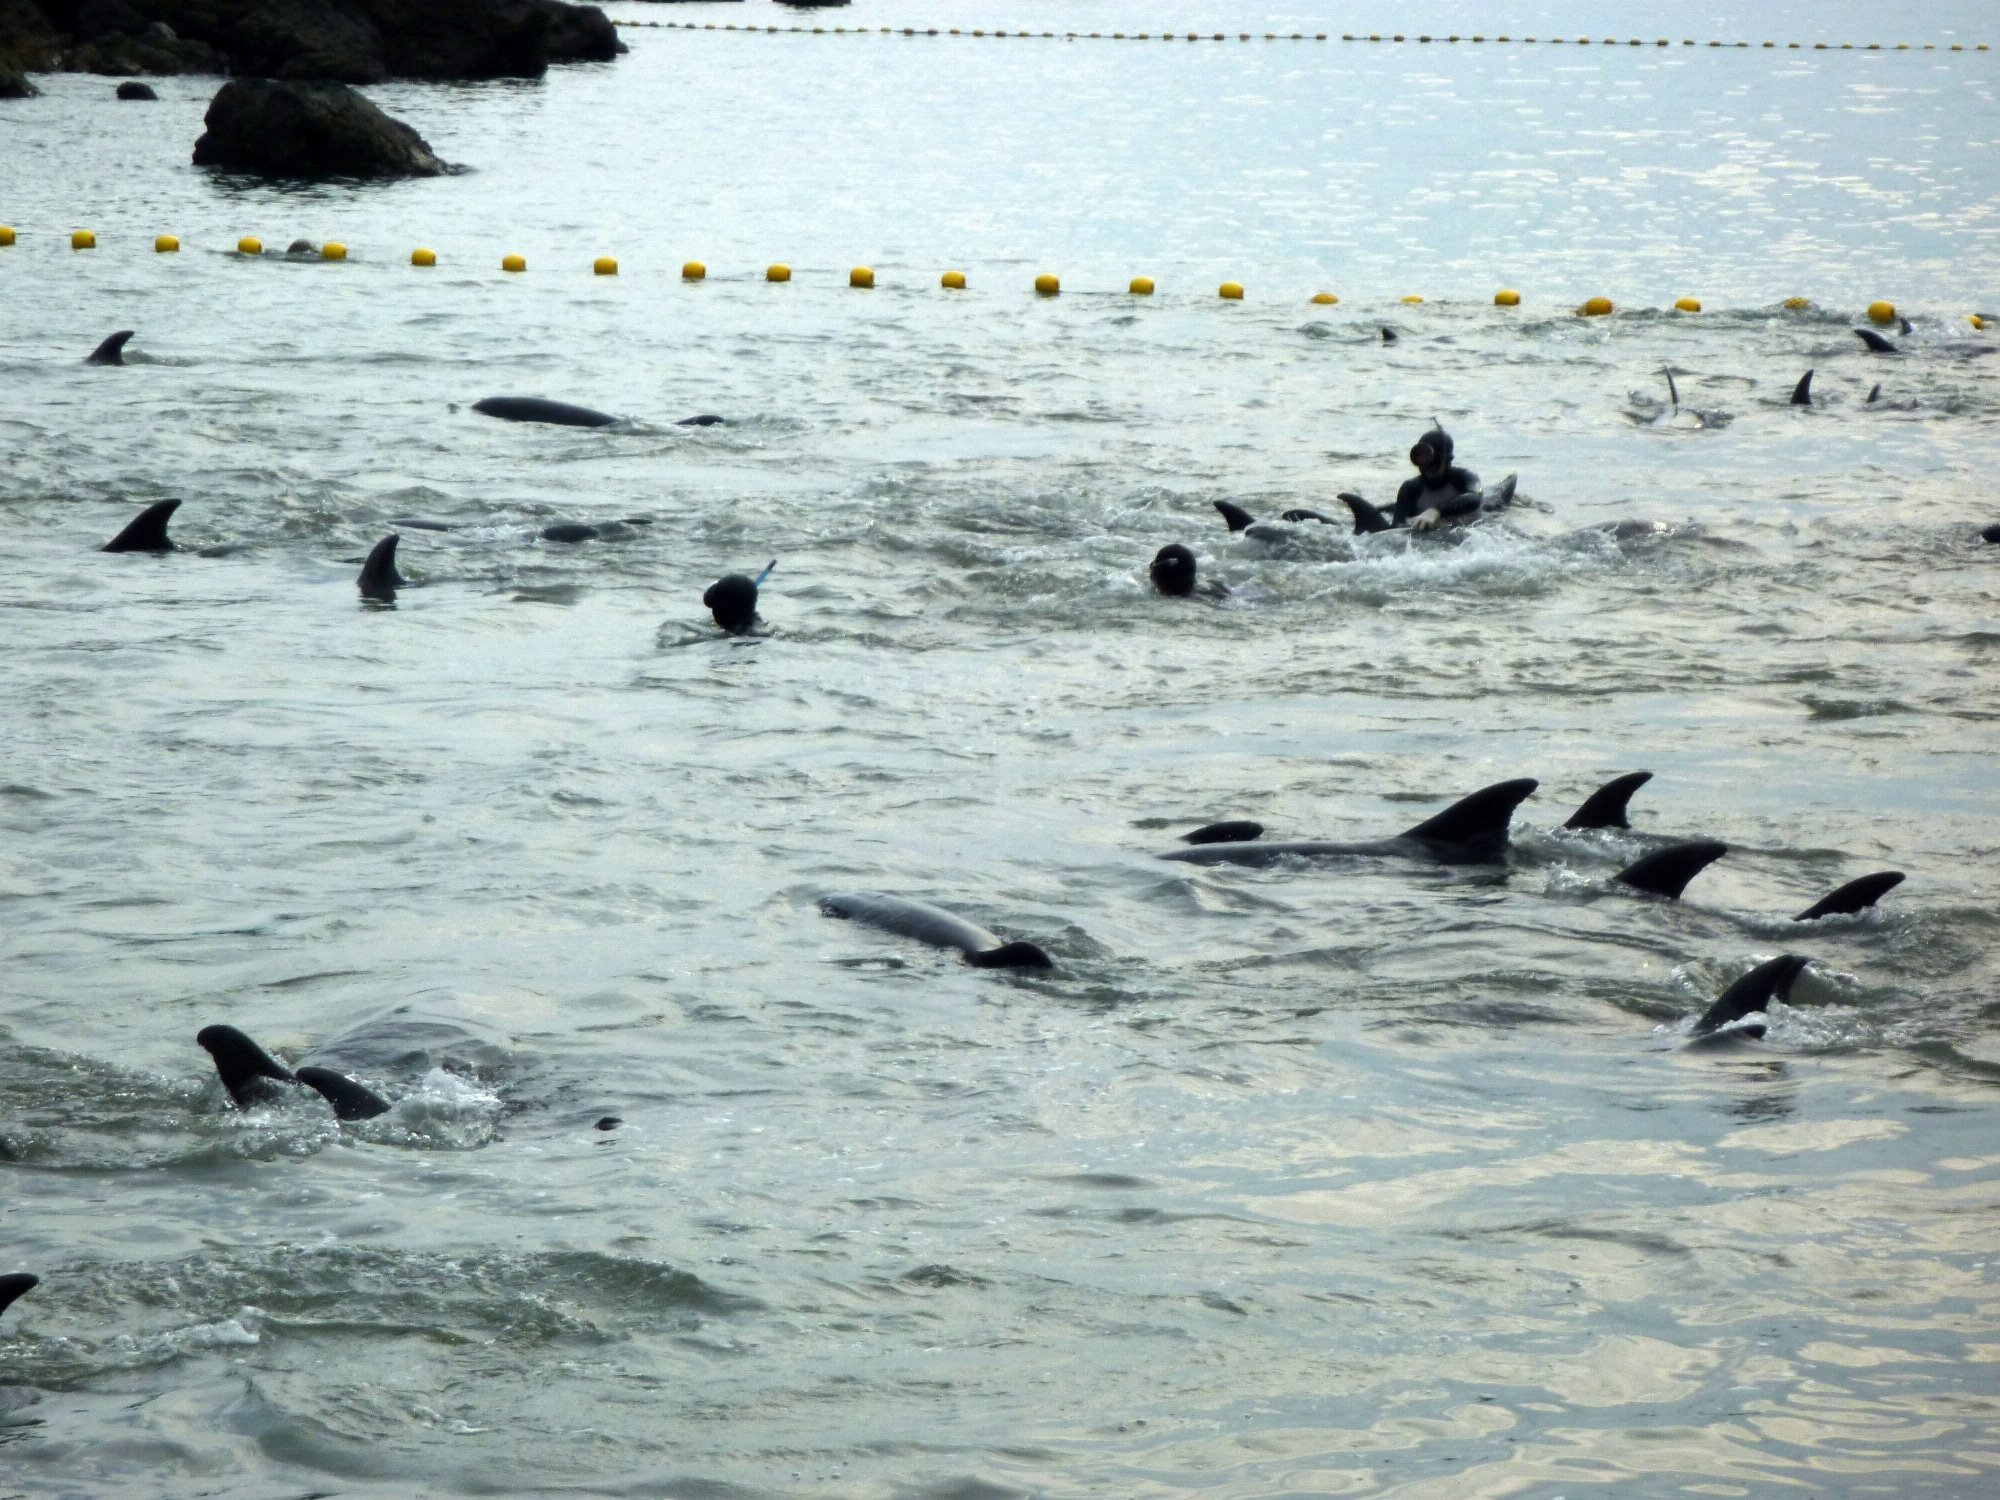 Dolphins in Taiji are secured in a small area before being killed or taken to an aquarium